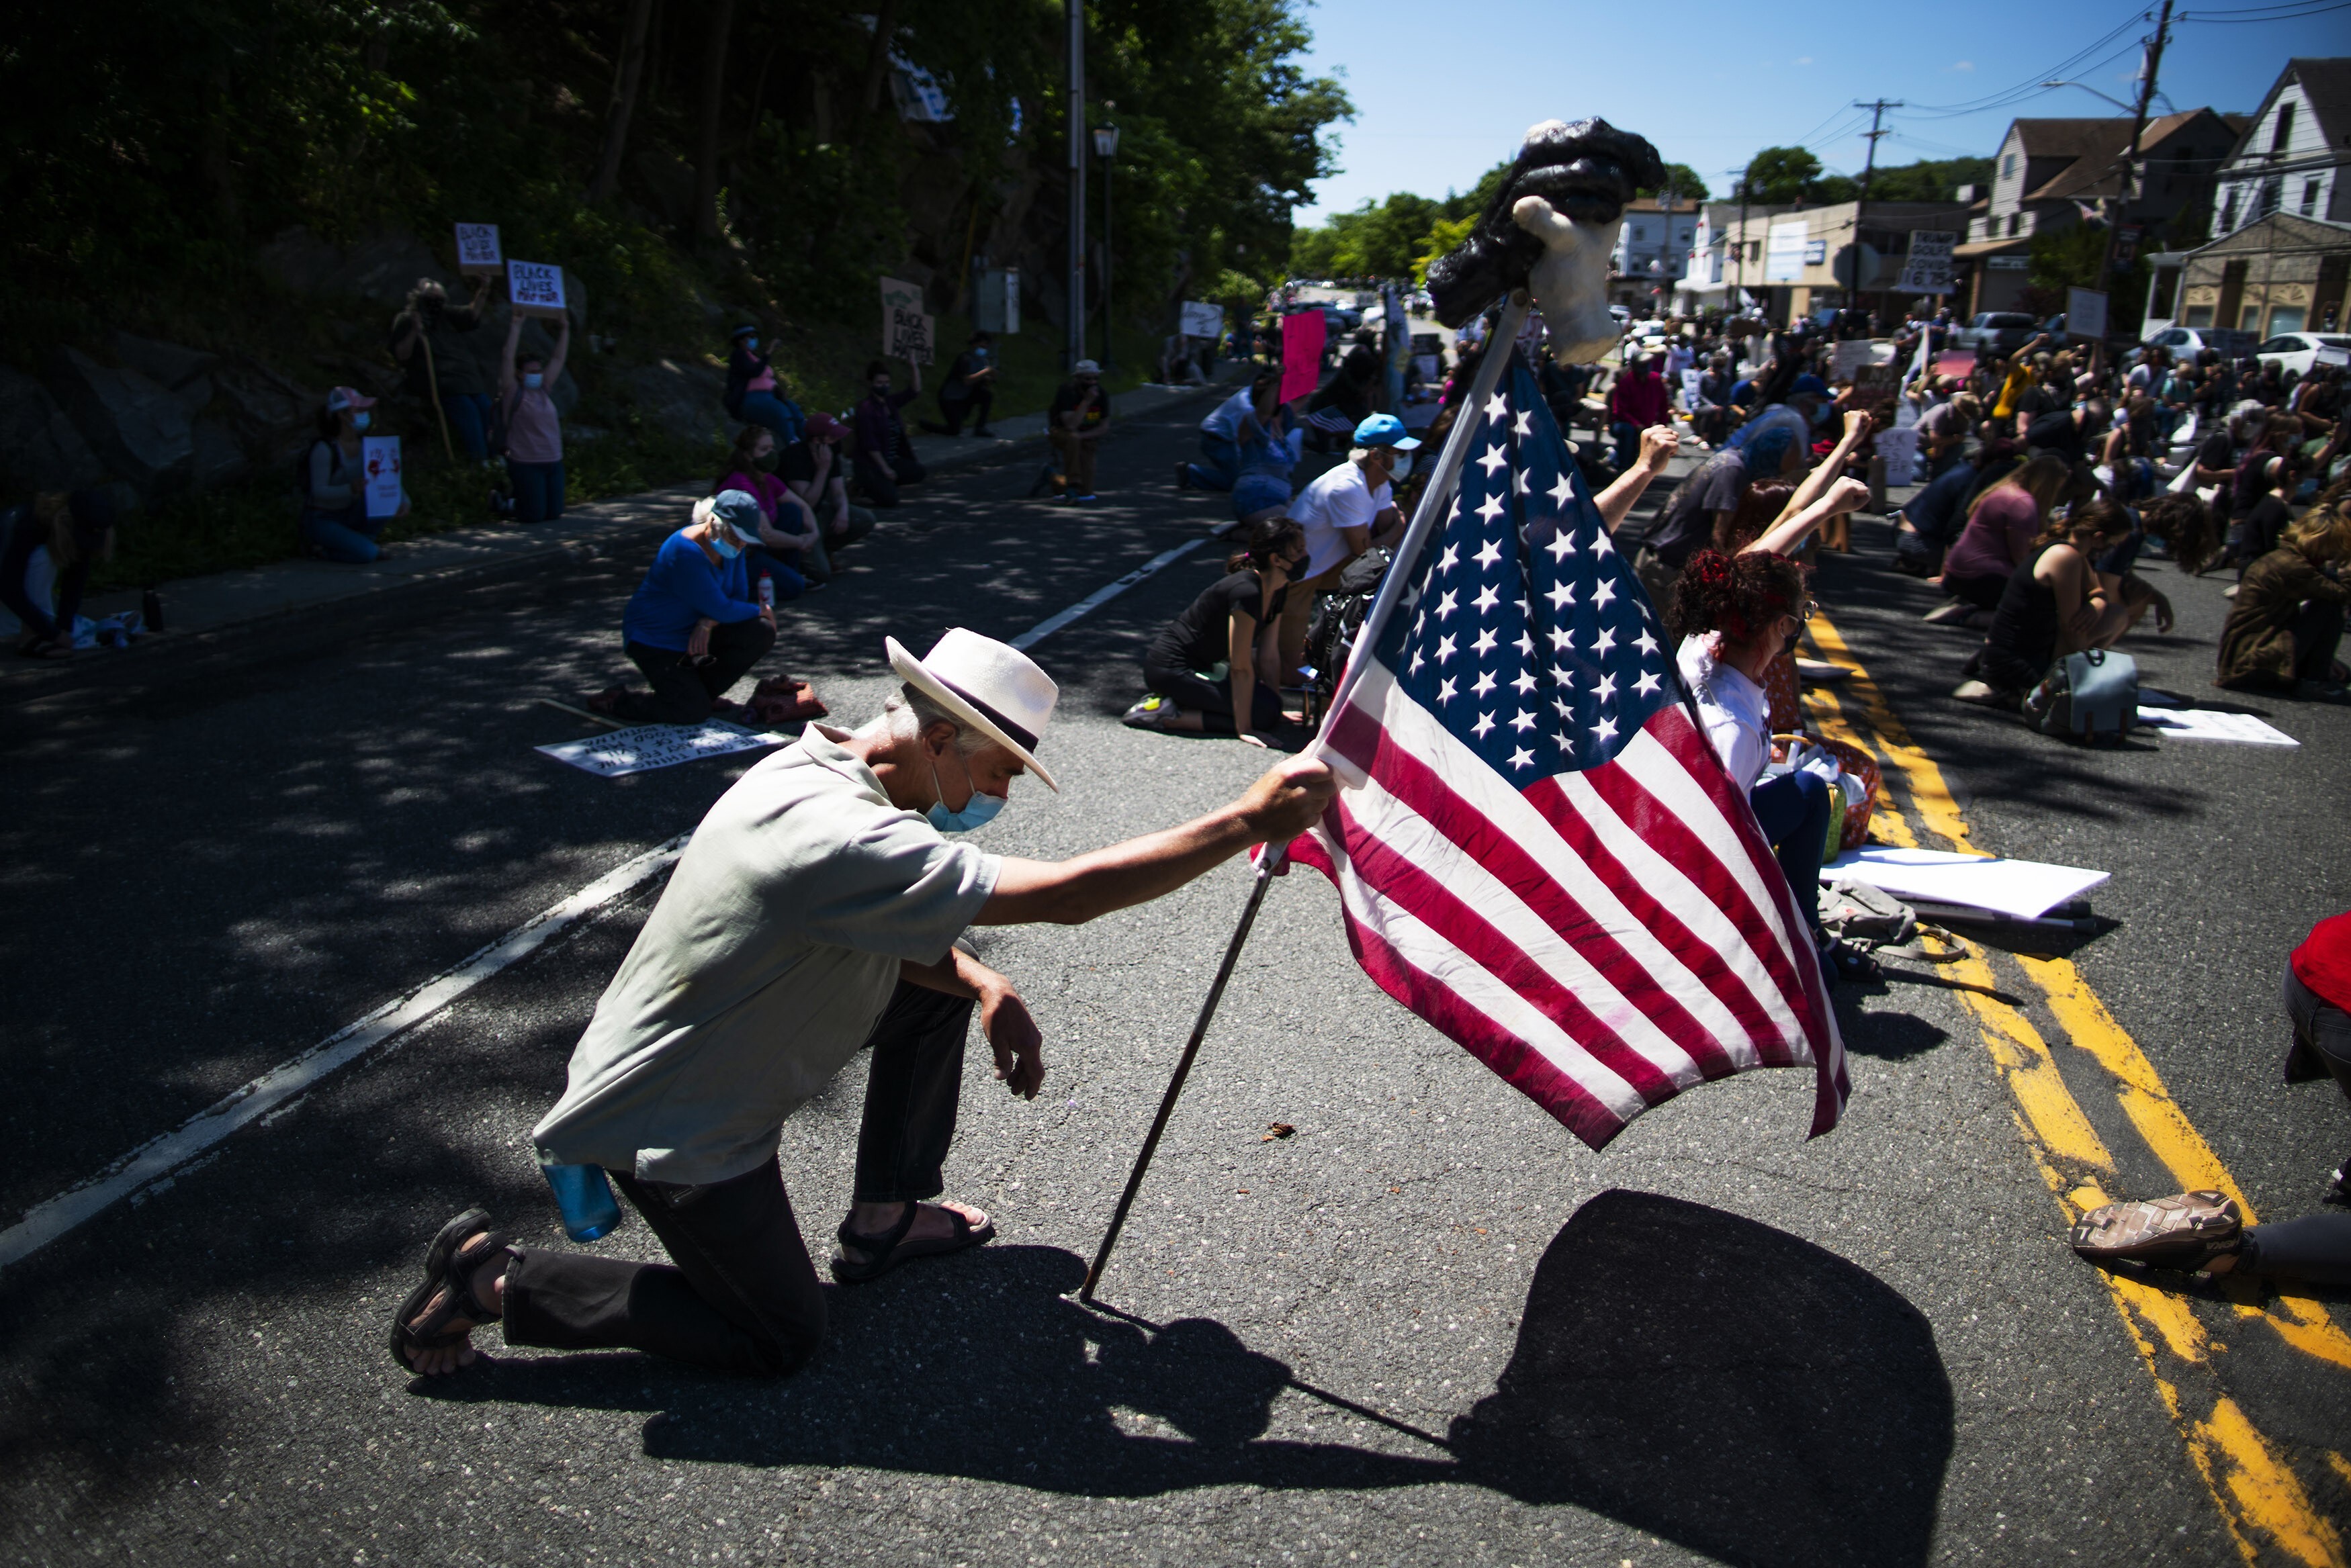 Demonstrators kneel during a solidarity protest for George Floyd on June 13 in West Point, New York. Photo: AP